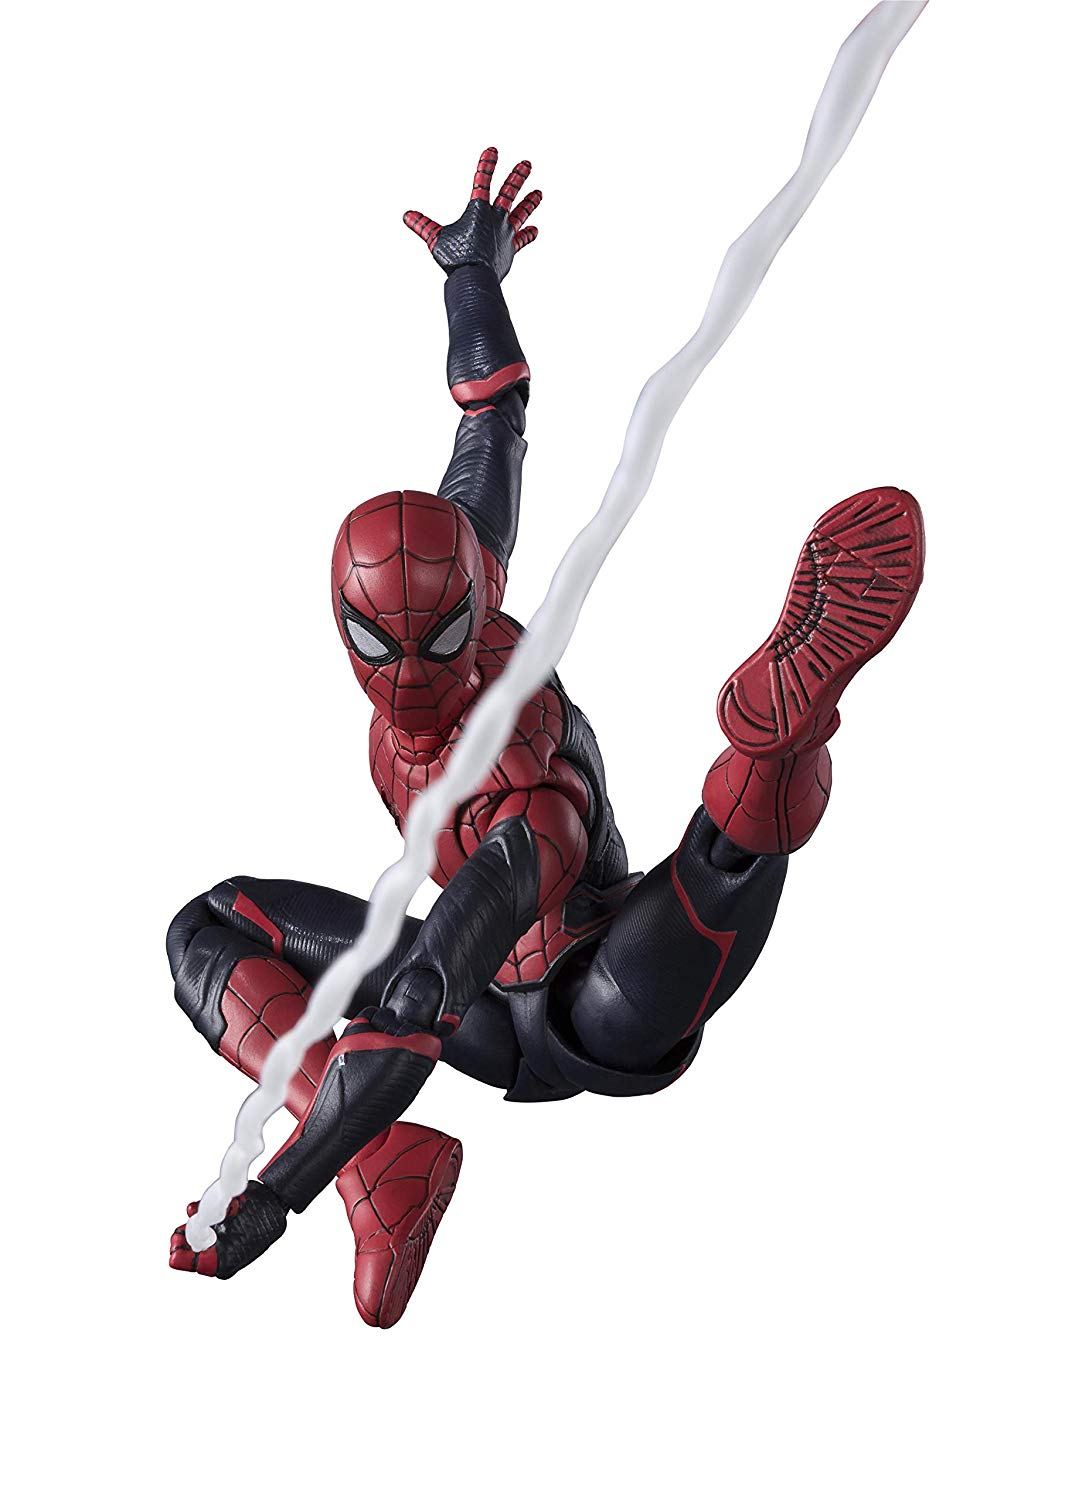 S.H.FIGUARTS SPIDER-MAN FAR FROM HOME: SPIDER-MAN UPGRADE SUIT (SPIDER-MAN FAR FROM HOME) Tamashii (Bandai Toys)